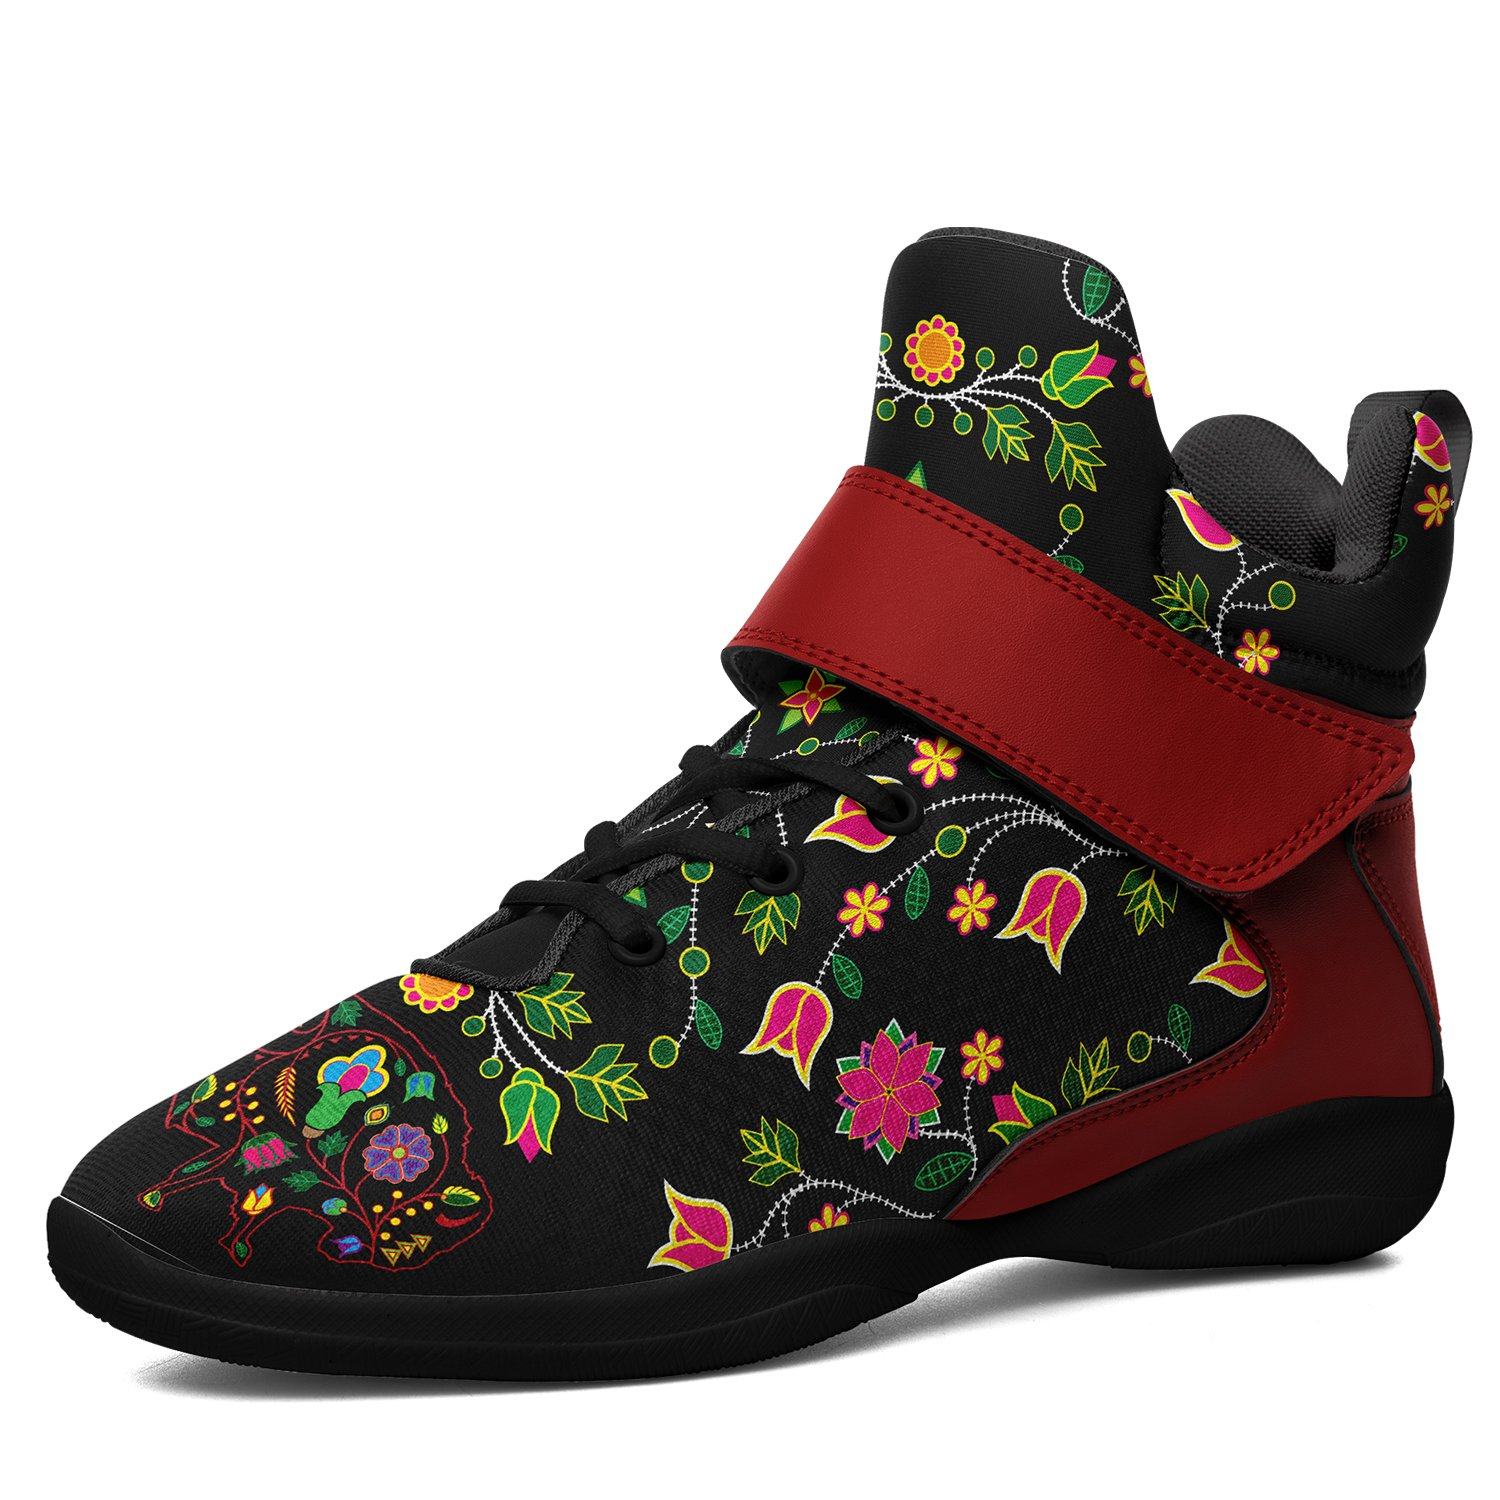 Floral Buffalo Ipottaa Basketball / Sport High Top Shoes ipottaa Herman US Women 9.5/ EUR 41 Black Sole with Dark Red Strap 